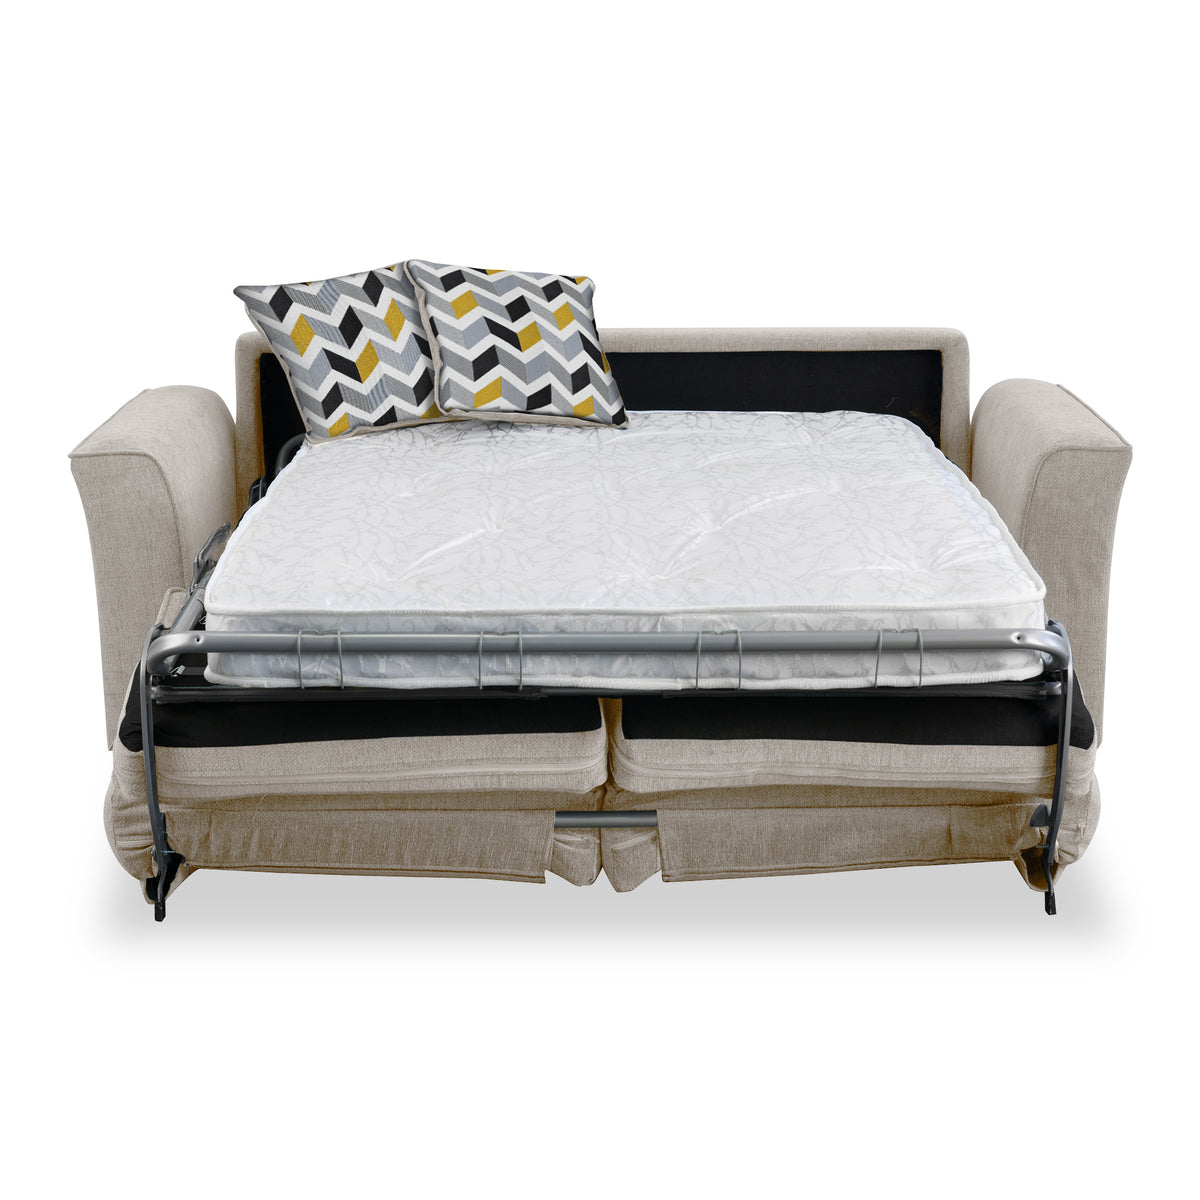 Boston 2 Seater Sofabed in Oatmeal with Morelisa Mustard Cushions by Roseland Furniture